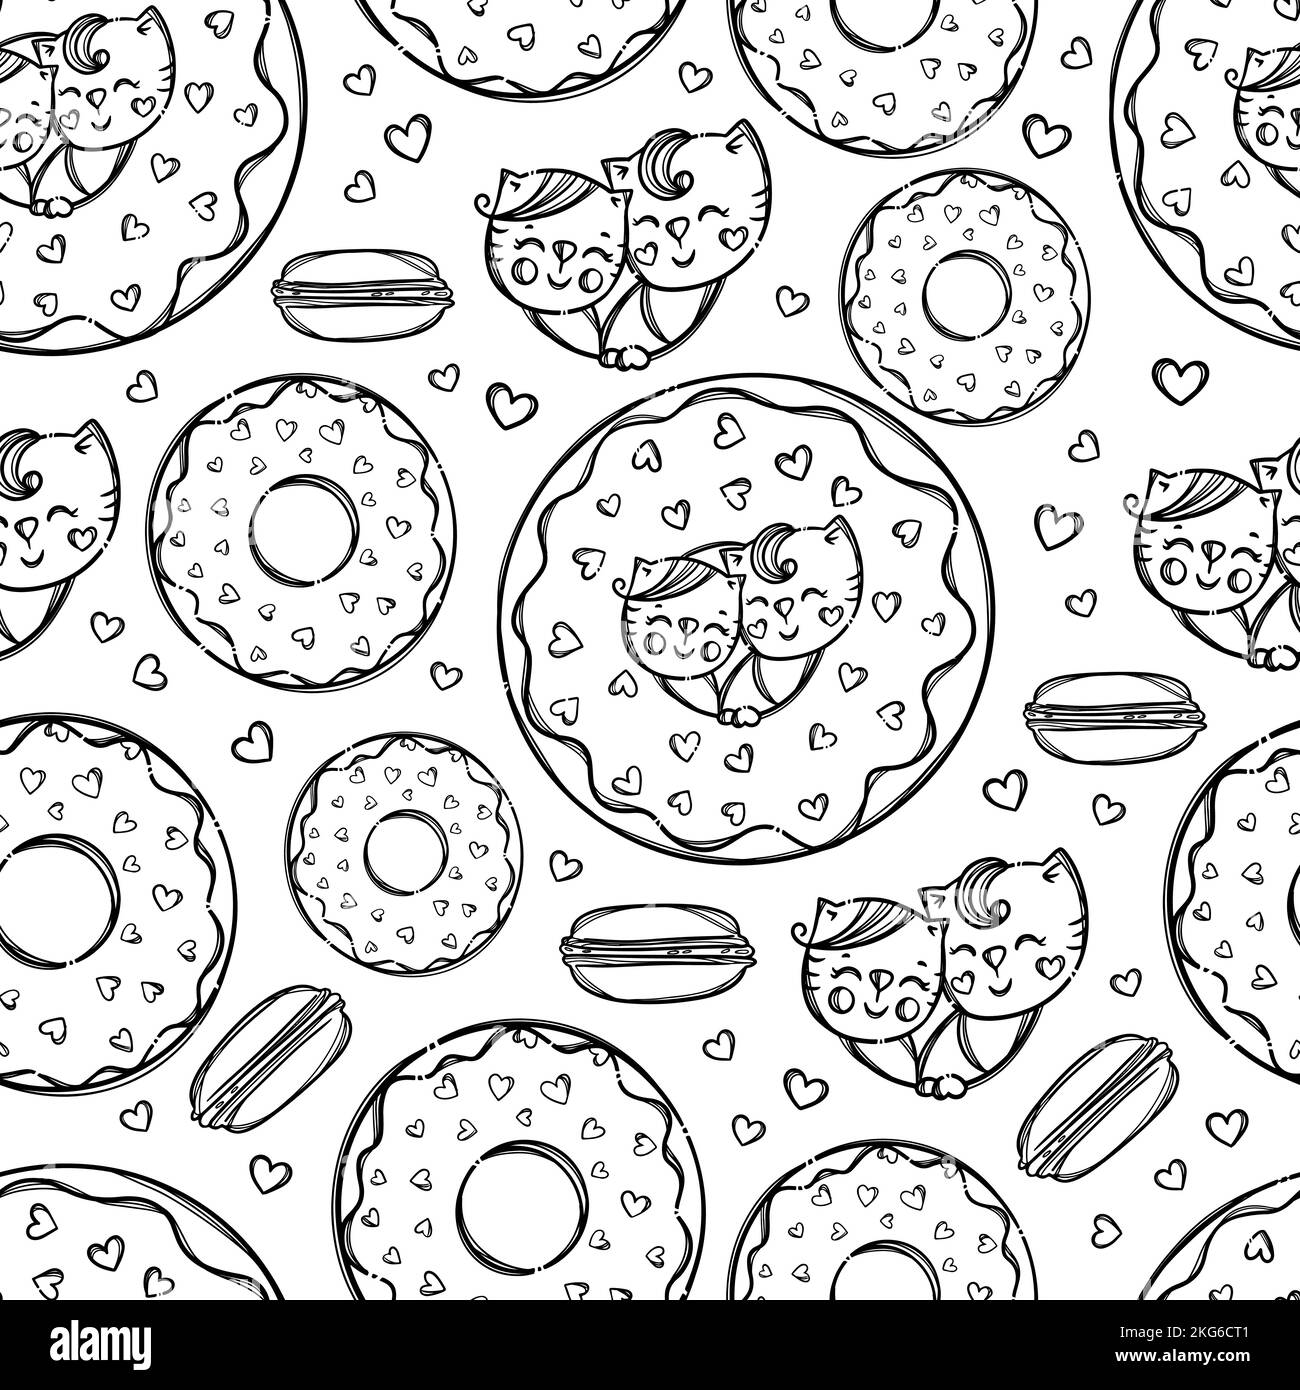 CAT IN DONUT Cute Kittens Stuck His Head In Doughnut And Sweet Bisquits Holiday Cartoon Monochrome Hand Drawn Seamless Pattern Vector Illustration For Stock Vector